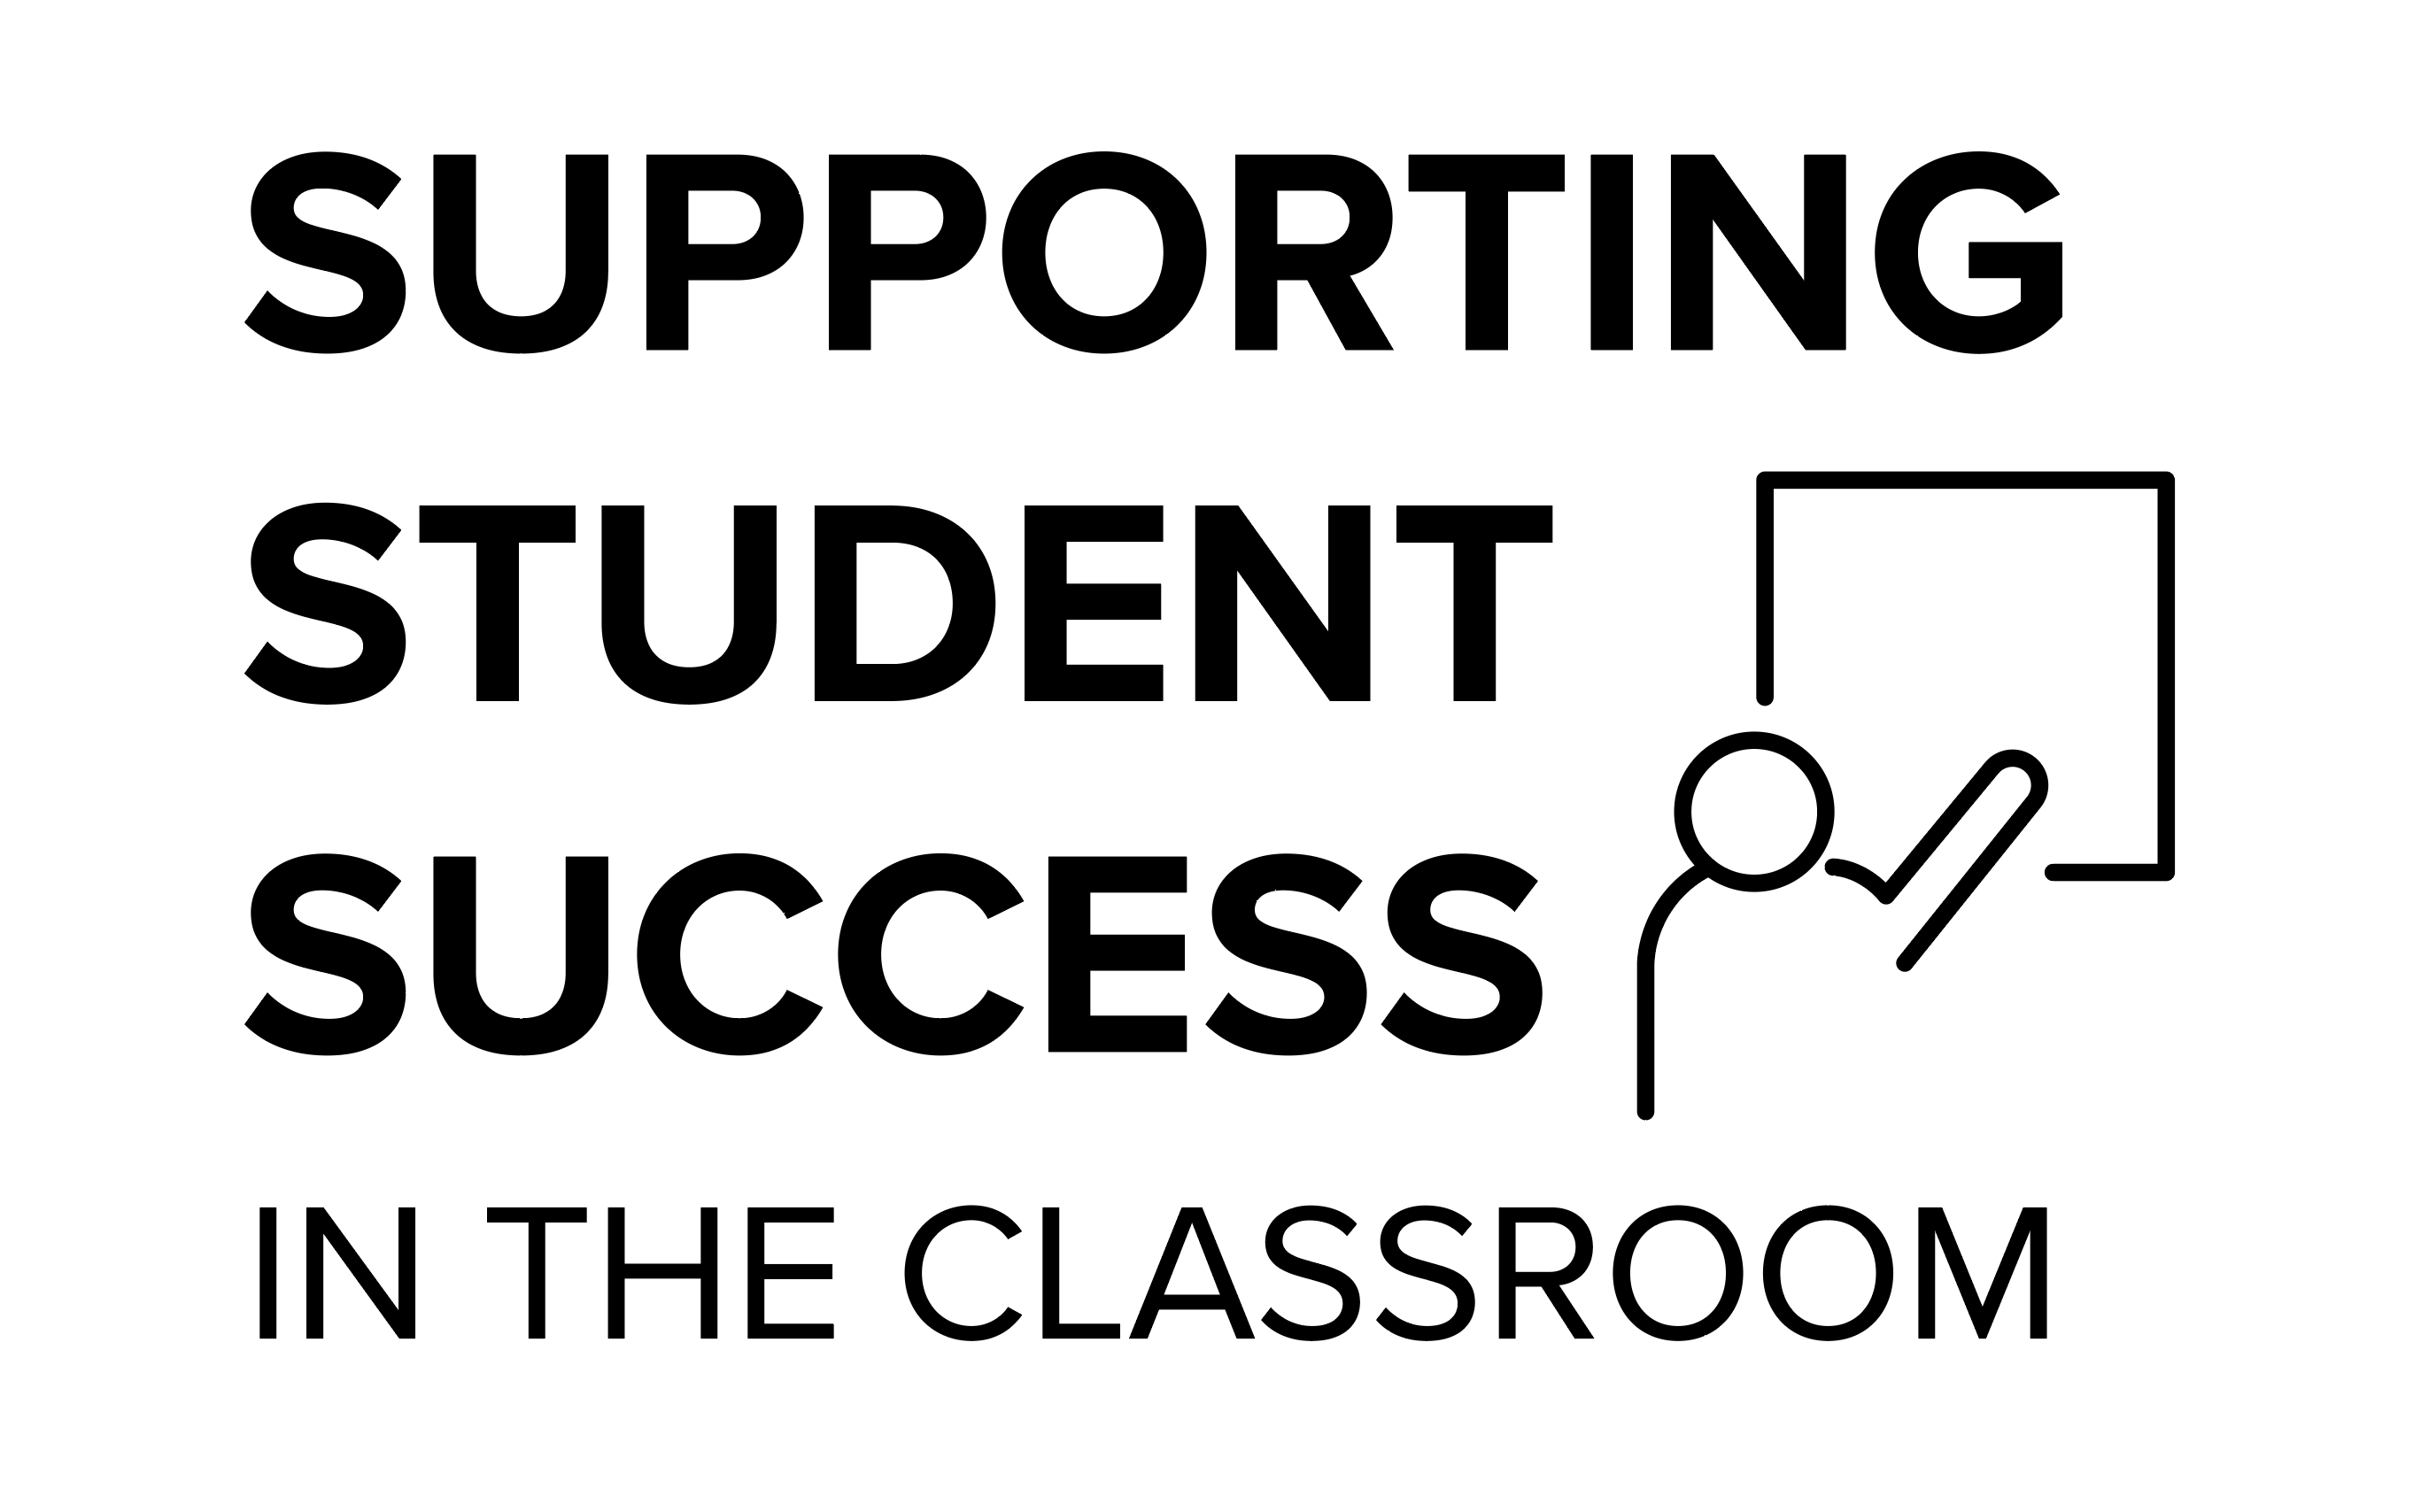 Supporting Student Success in the Classroom